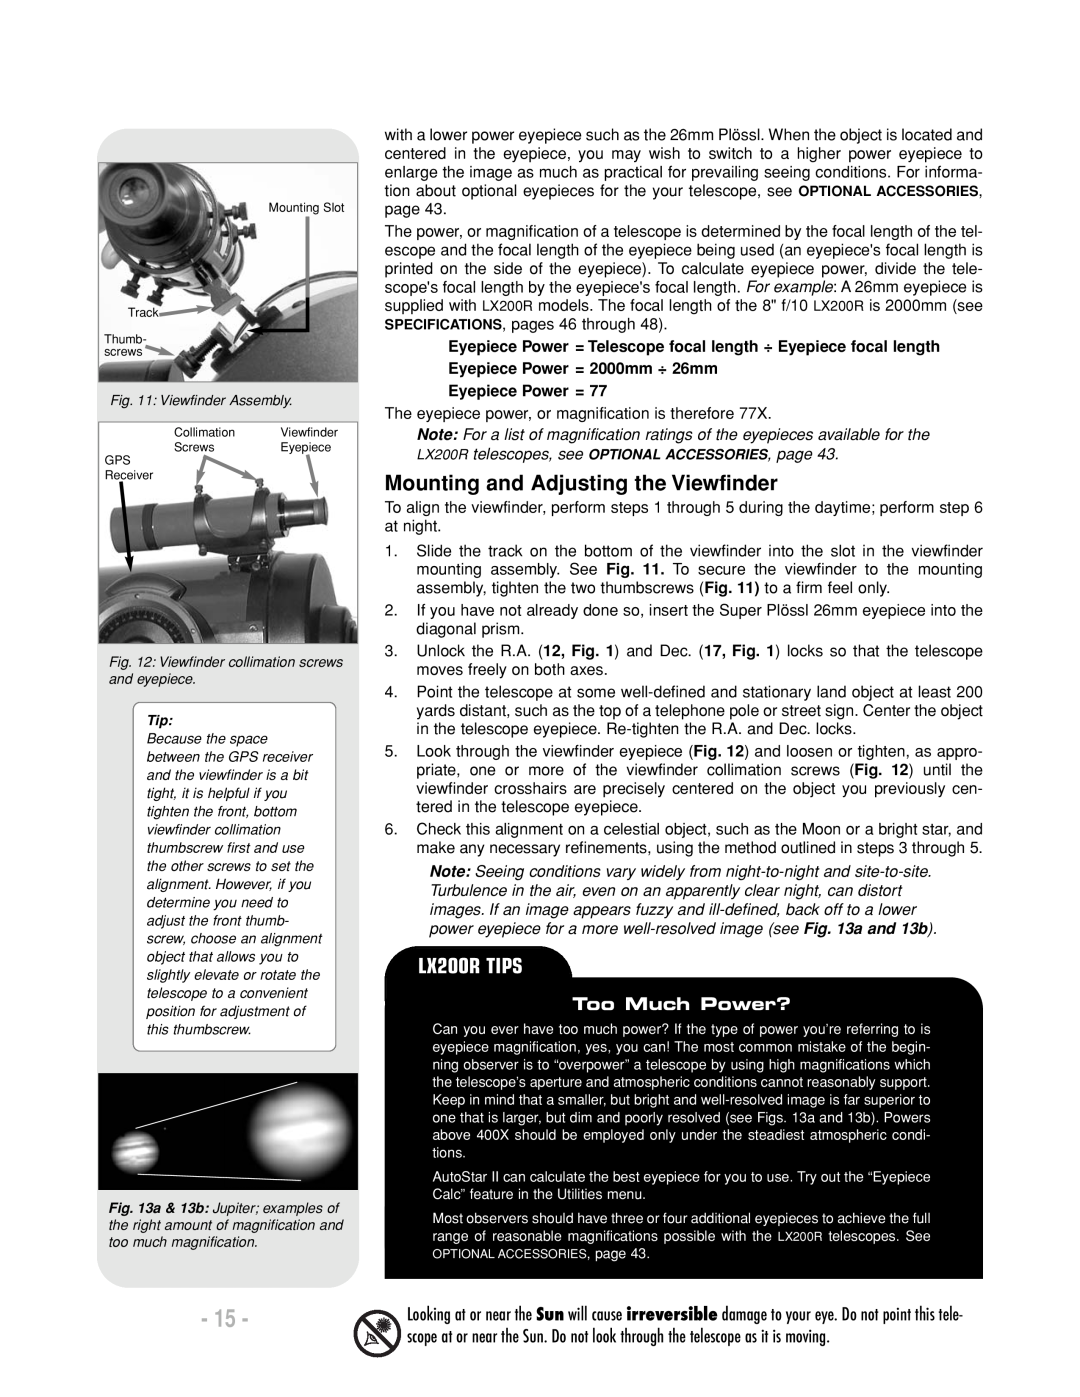 Meade LX200 R instruction manual Mounting and Adjusting the Viewfinder, Too Much Power?, LX200R TIPS, Eyepiece Power = 